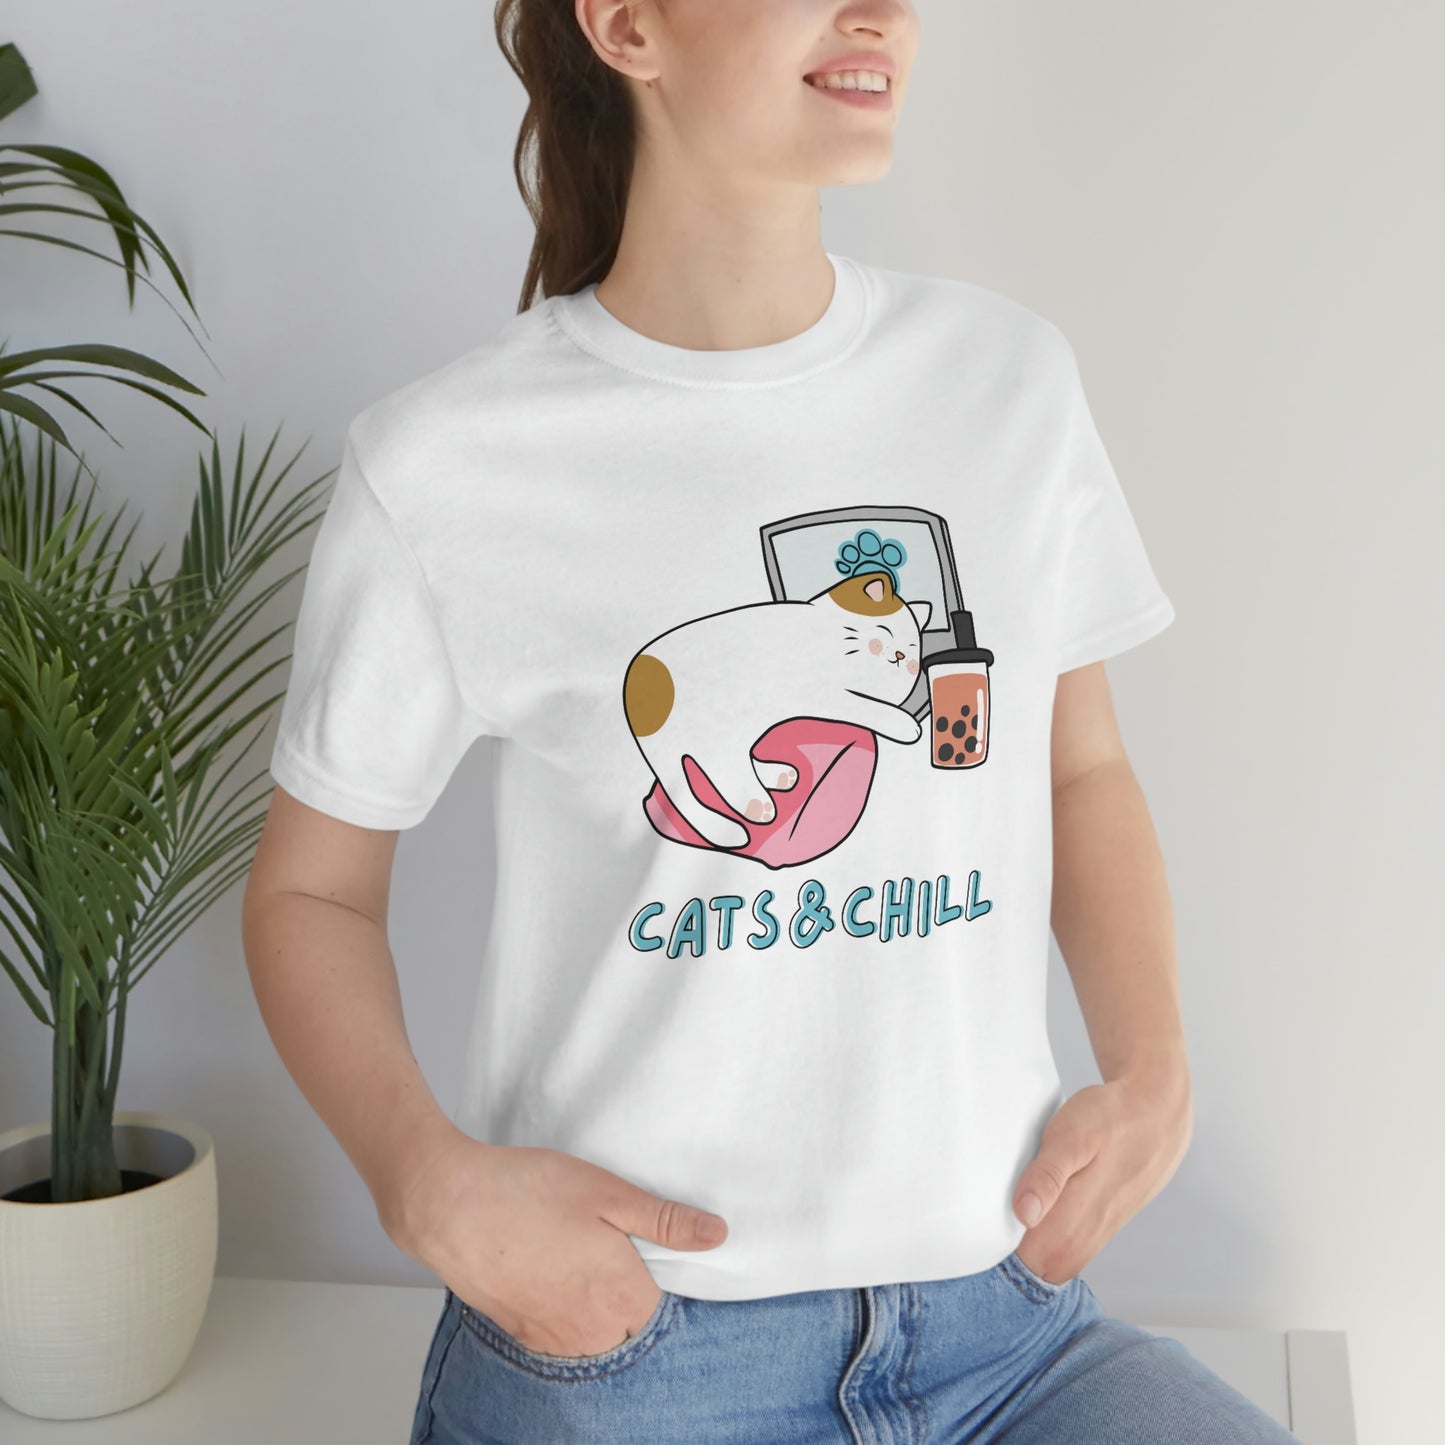 Cats and chill Tee, cat lover gift, funny cat tshirt, crazy cat lady t shirt, sarcastic cat tee, cat mom tee, cute cat shirt, shirt with cat